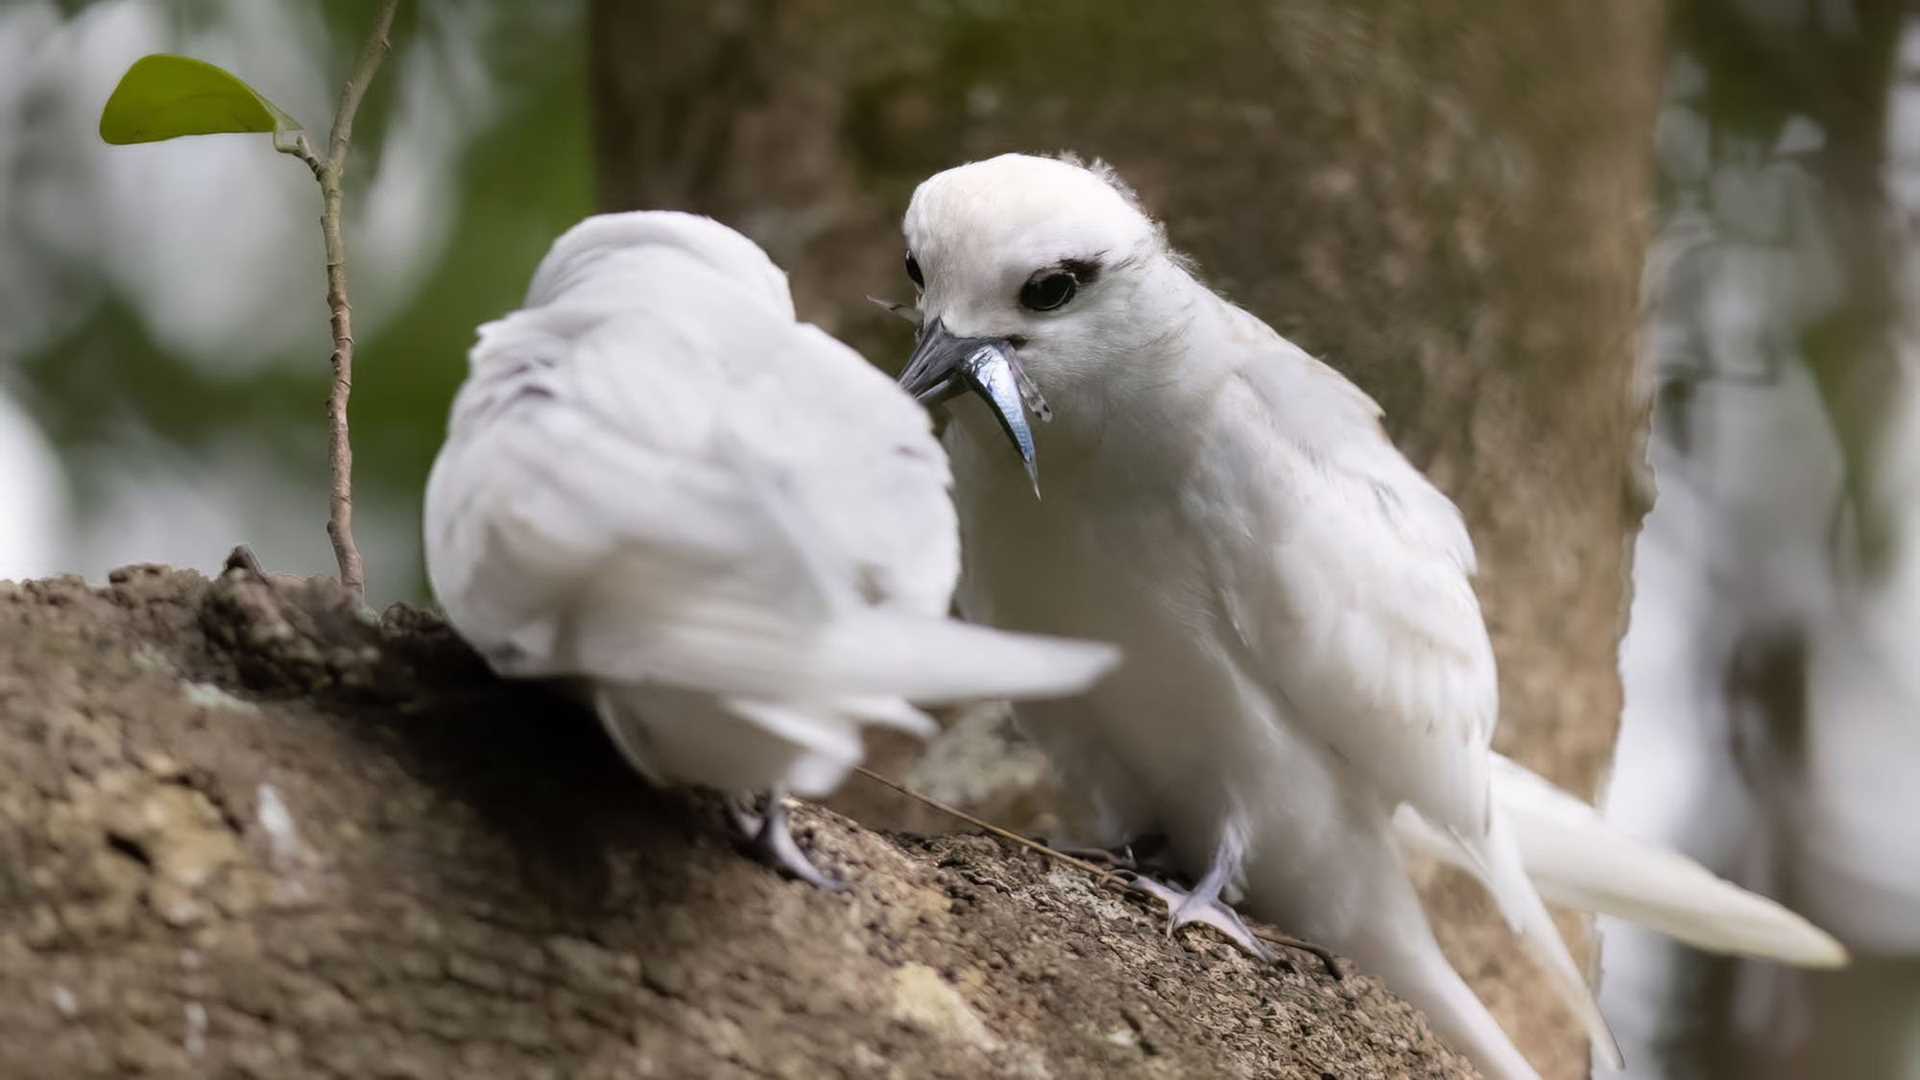 two white birds sharing a fish